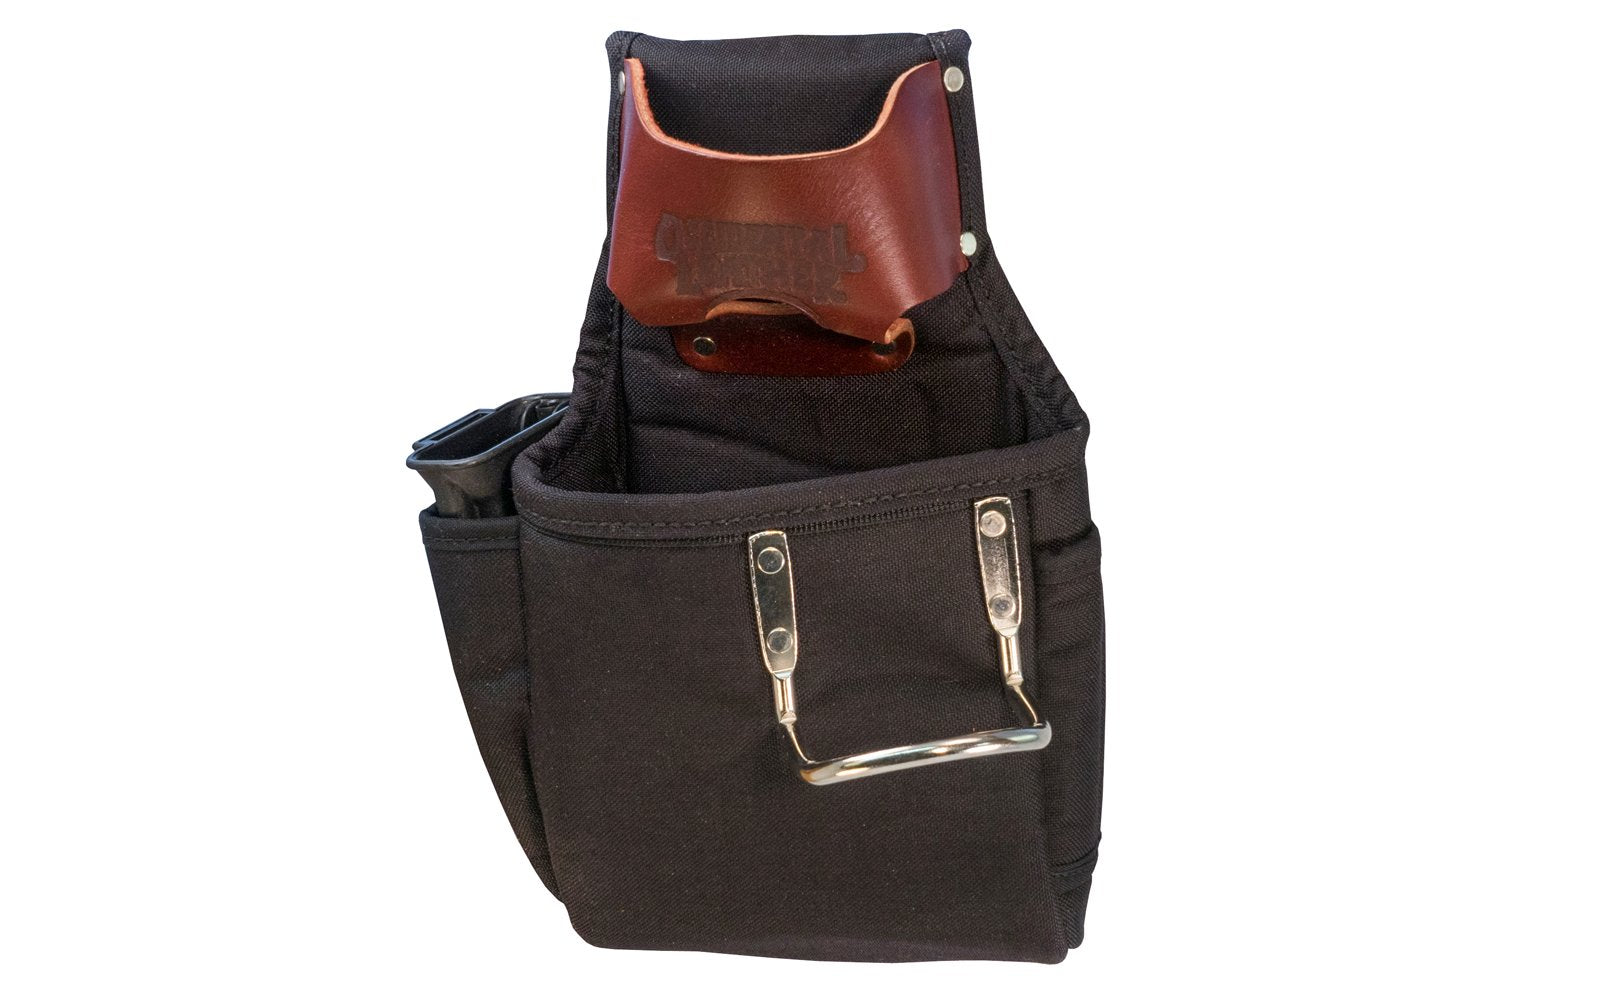 Occidental Leather 6-in-1 Pouch ~ Model 9025 - Fits a 3" work belt - Nylon Pouch - Multi-functional pouch for small tasks - Features 6 pockets - Six pocket pouch ~ Carry a tape, hammer, knife or chisel, pencils & fasteners! Perfect for small jobs - Cordura material with foam core - Hammer Holder - Tape Measure Holder 